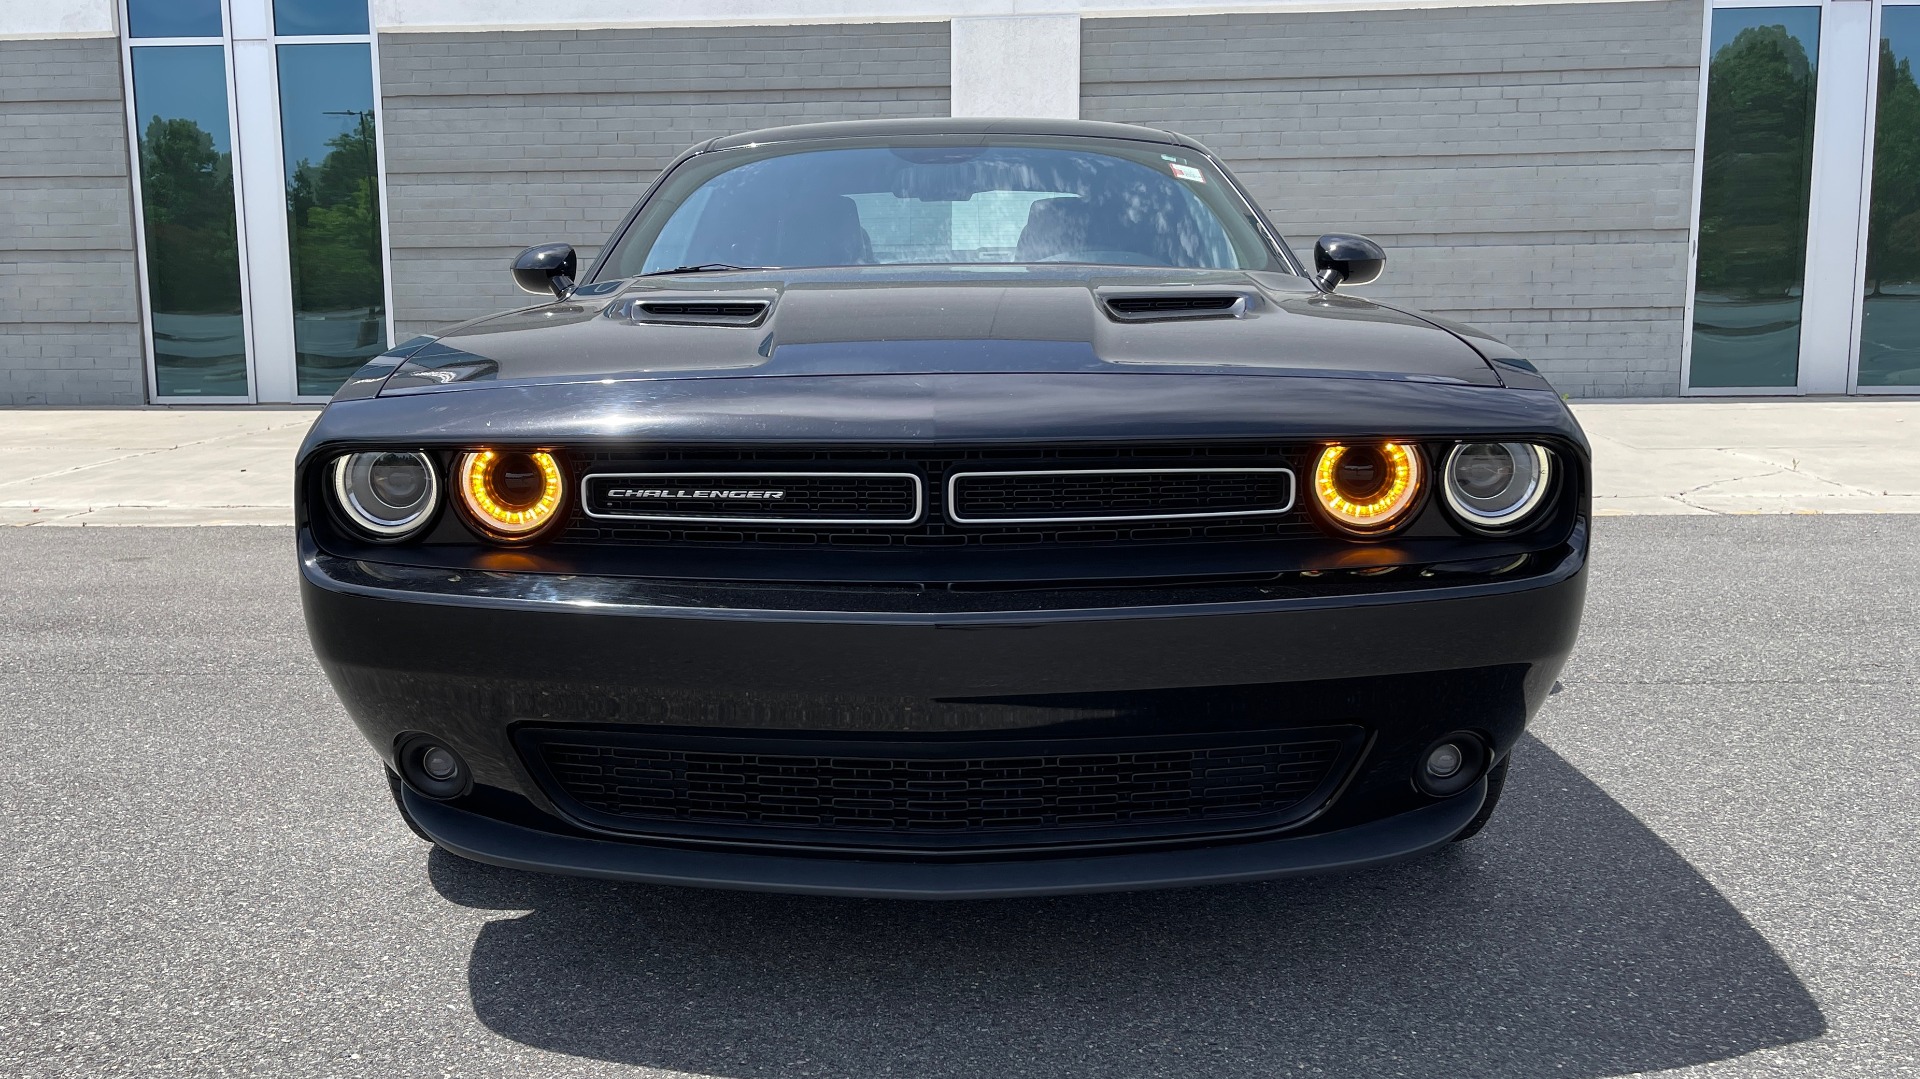 Used 2015 Dodge CHALLENGER SXT PLUS COUPE / 3.6L V6 / 8-SPD AUTO / NAV / ALPINE / SUNROOF / REARVIEW for sale Sold at Formula Imports in Charlotte NC 28227 11